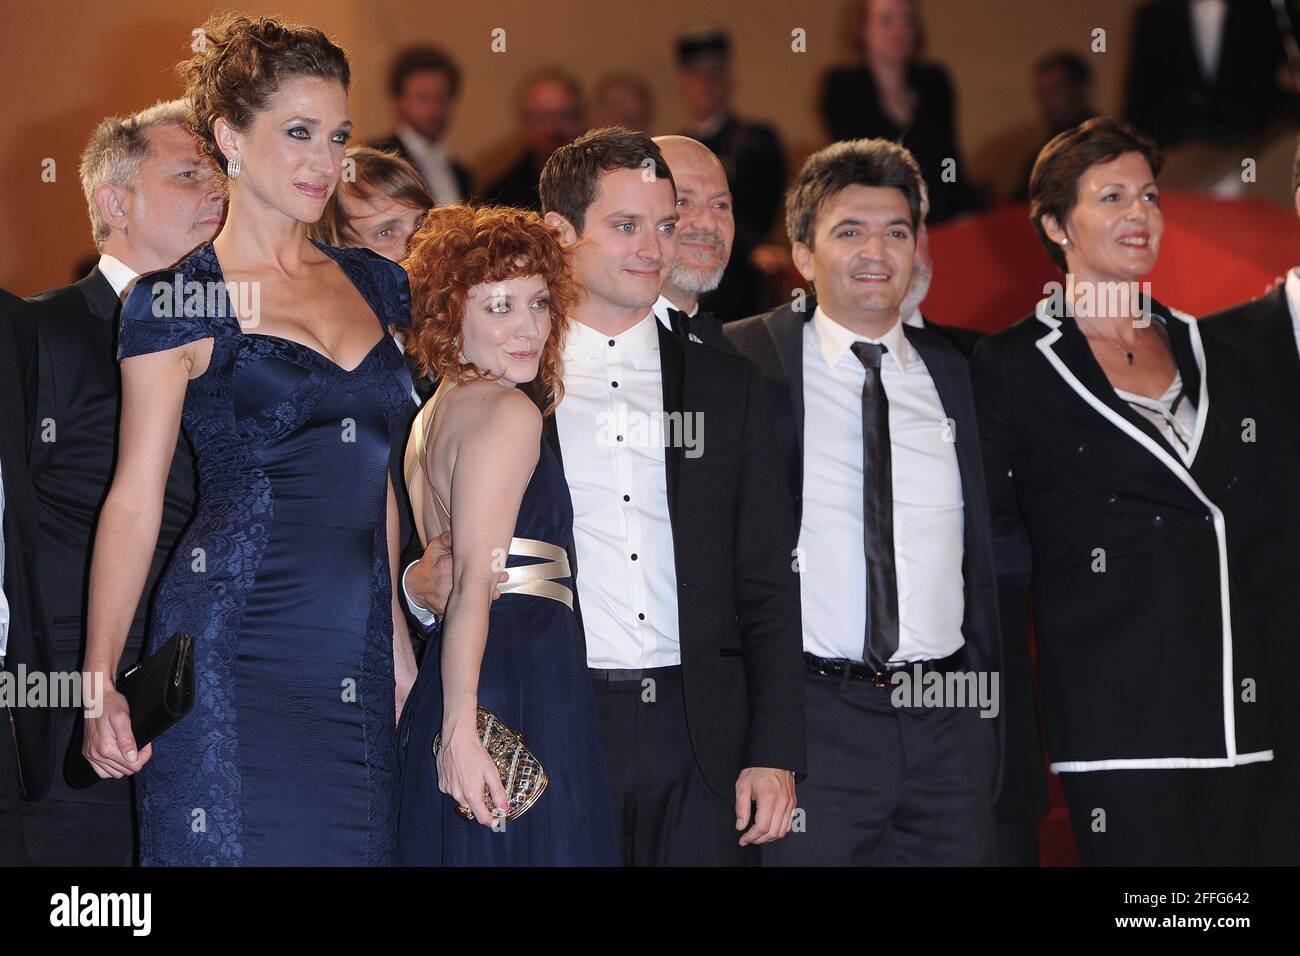 Cannes, France. 26 May 2012 Premiere film Maniac during 65th Cannes Film Festival Stock Photo